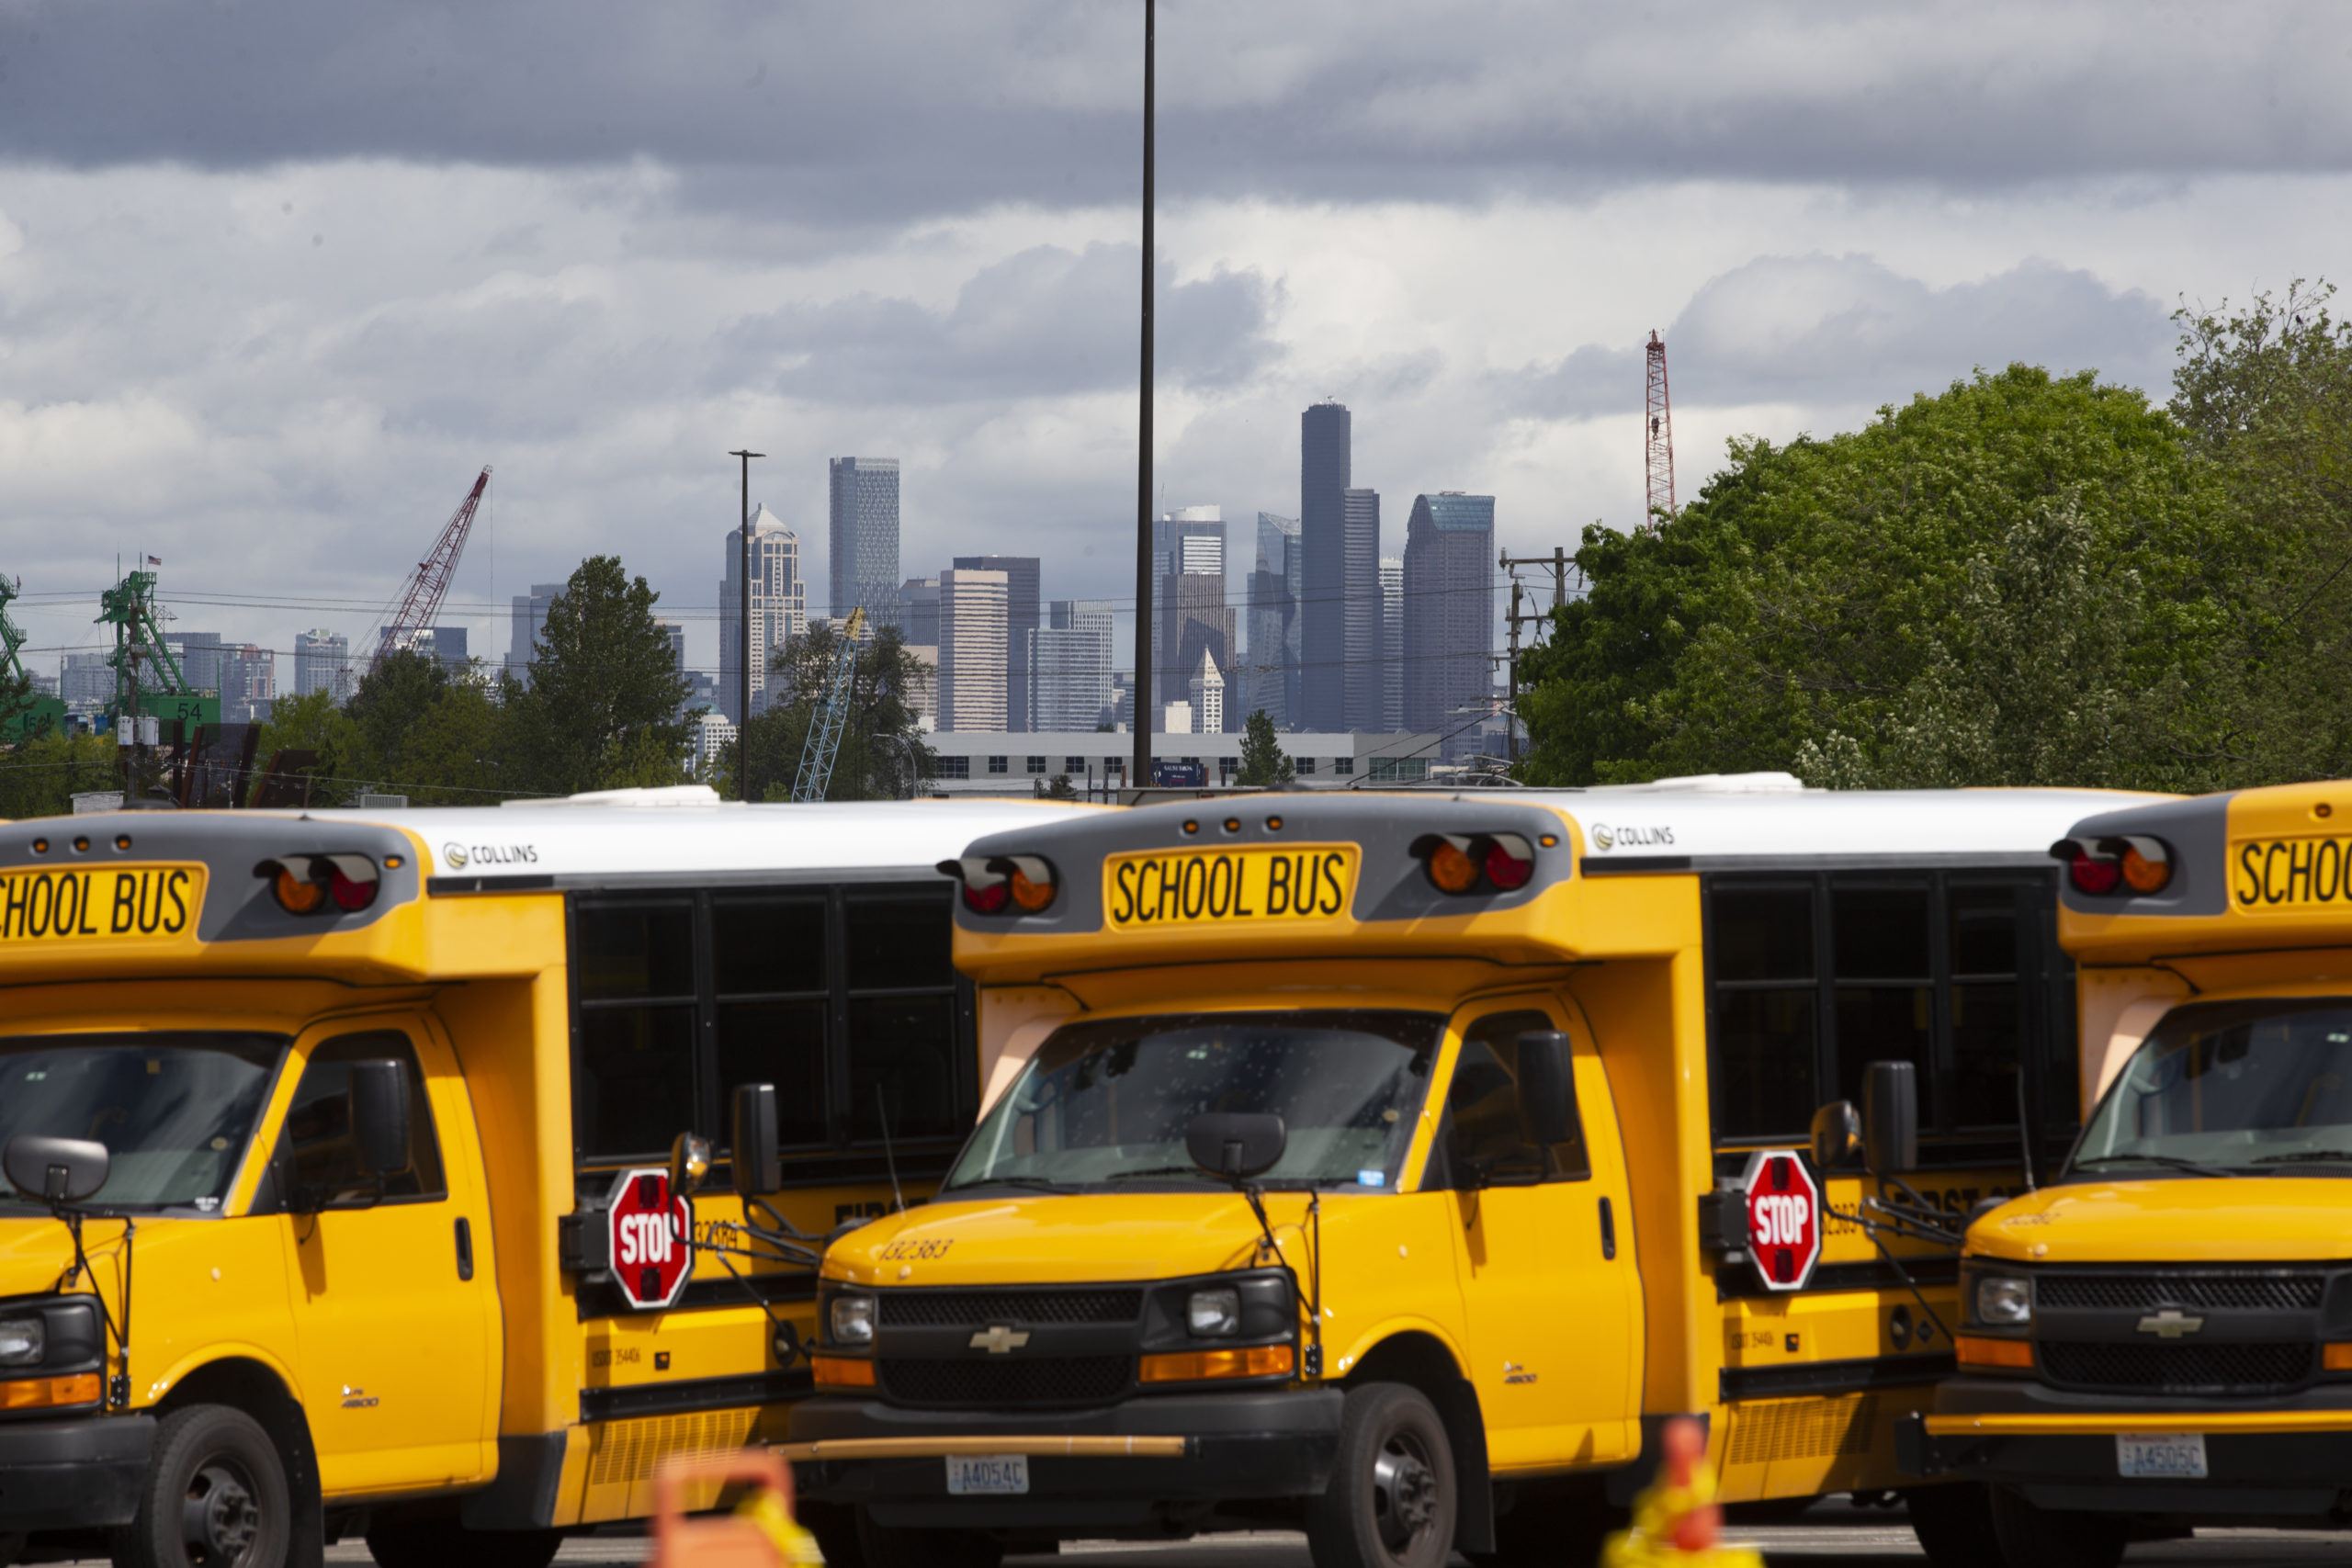 School buses sit idle in a bus yard on May 6, 2020 in Seattle, Washington. Since the outbreak of COVID-19 and the closure of all school buildings, the Seattle Public Schools Nutrition Services Department has been distributing breakfast and lunch to students through a network of 26 school sites and 43 bus routes five days a week. The meal distribution also includes additional food for weekends. Approximately 6,500 people are served per day through the program. (Photo by Karen Ducey/Getty Images)